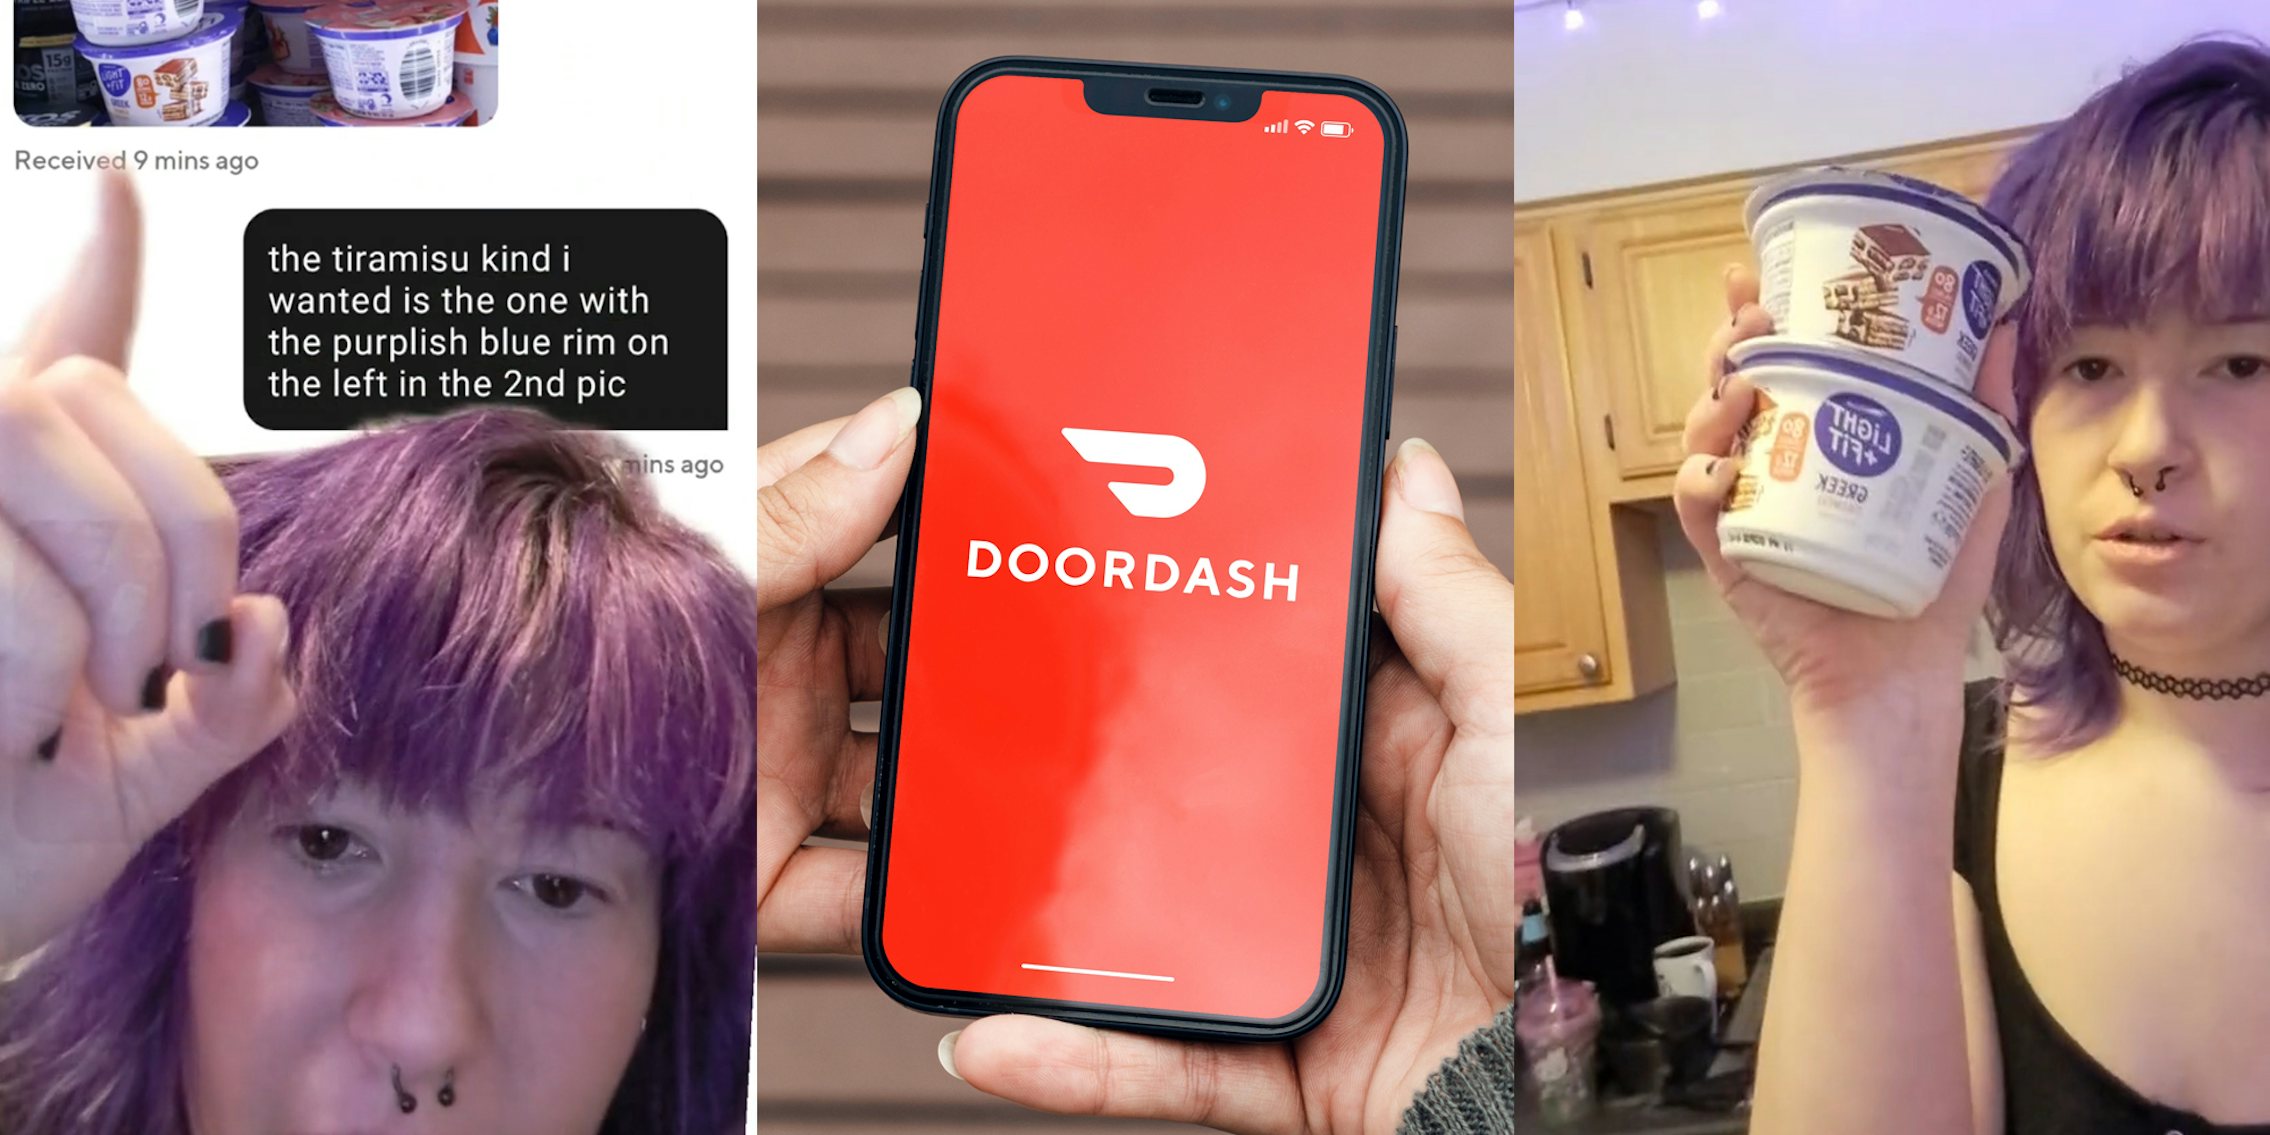 DoorDash customer greenscreen TikTok over chat with image of yogurt and message 'the tiramisu kind i wanted is the one with the purplish blue rim on the left in the 2nd pic' (l) DoorDash on phone screen in hands in front of wooden background (c) DoorDash customer speaking holding yogurt (r)